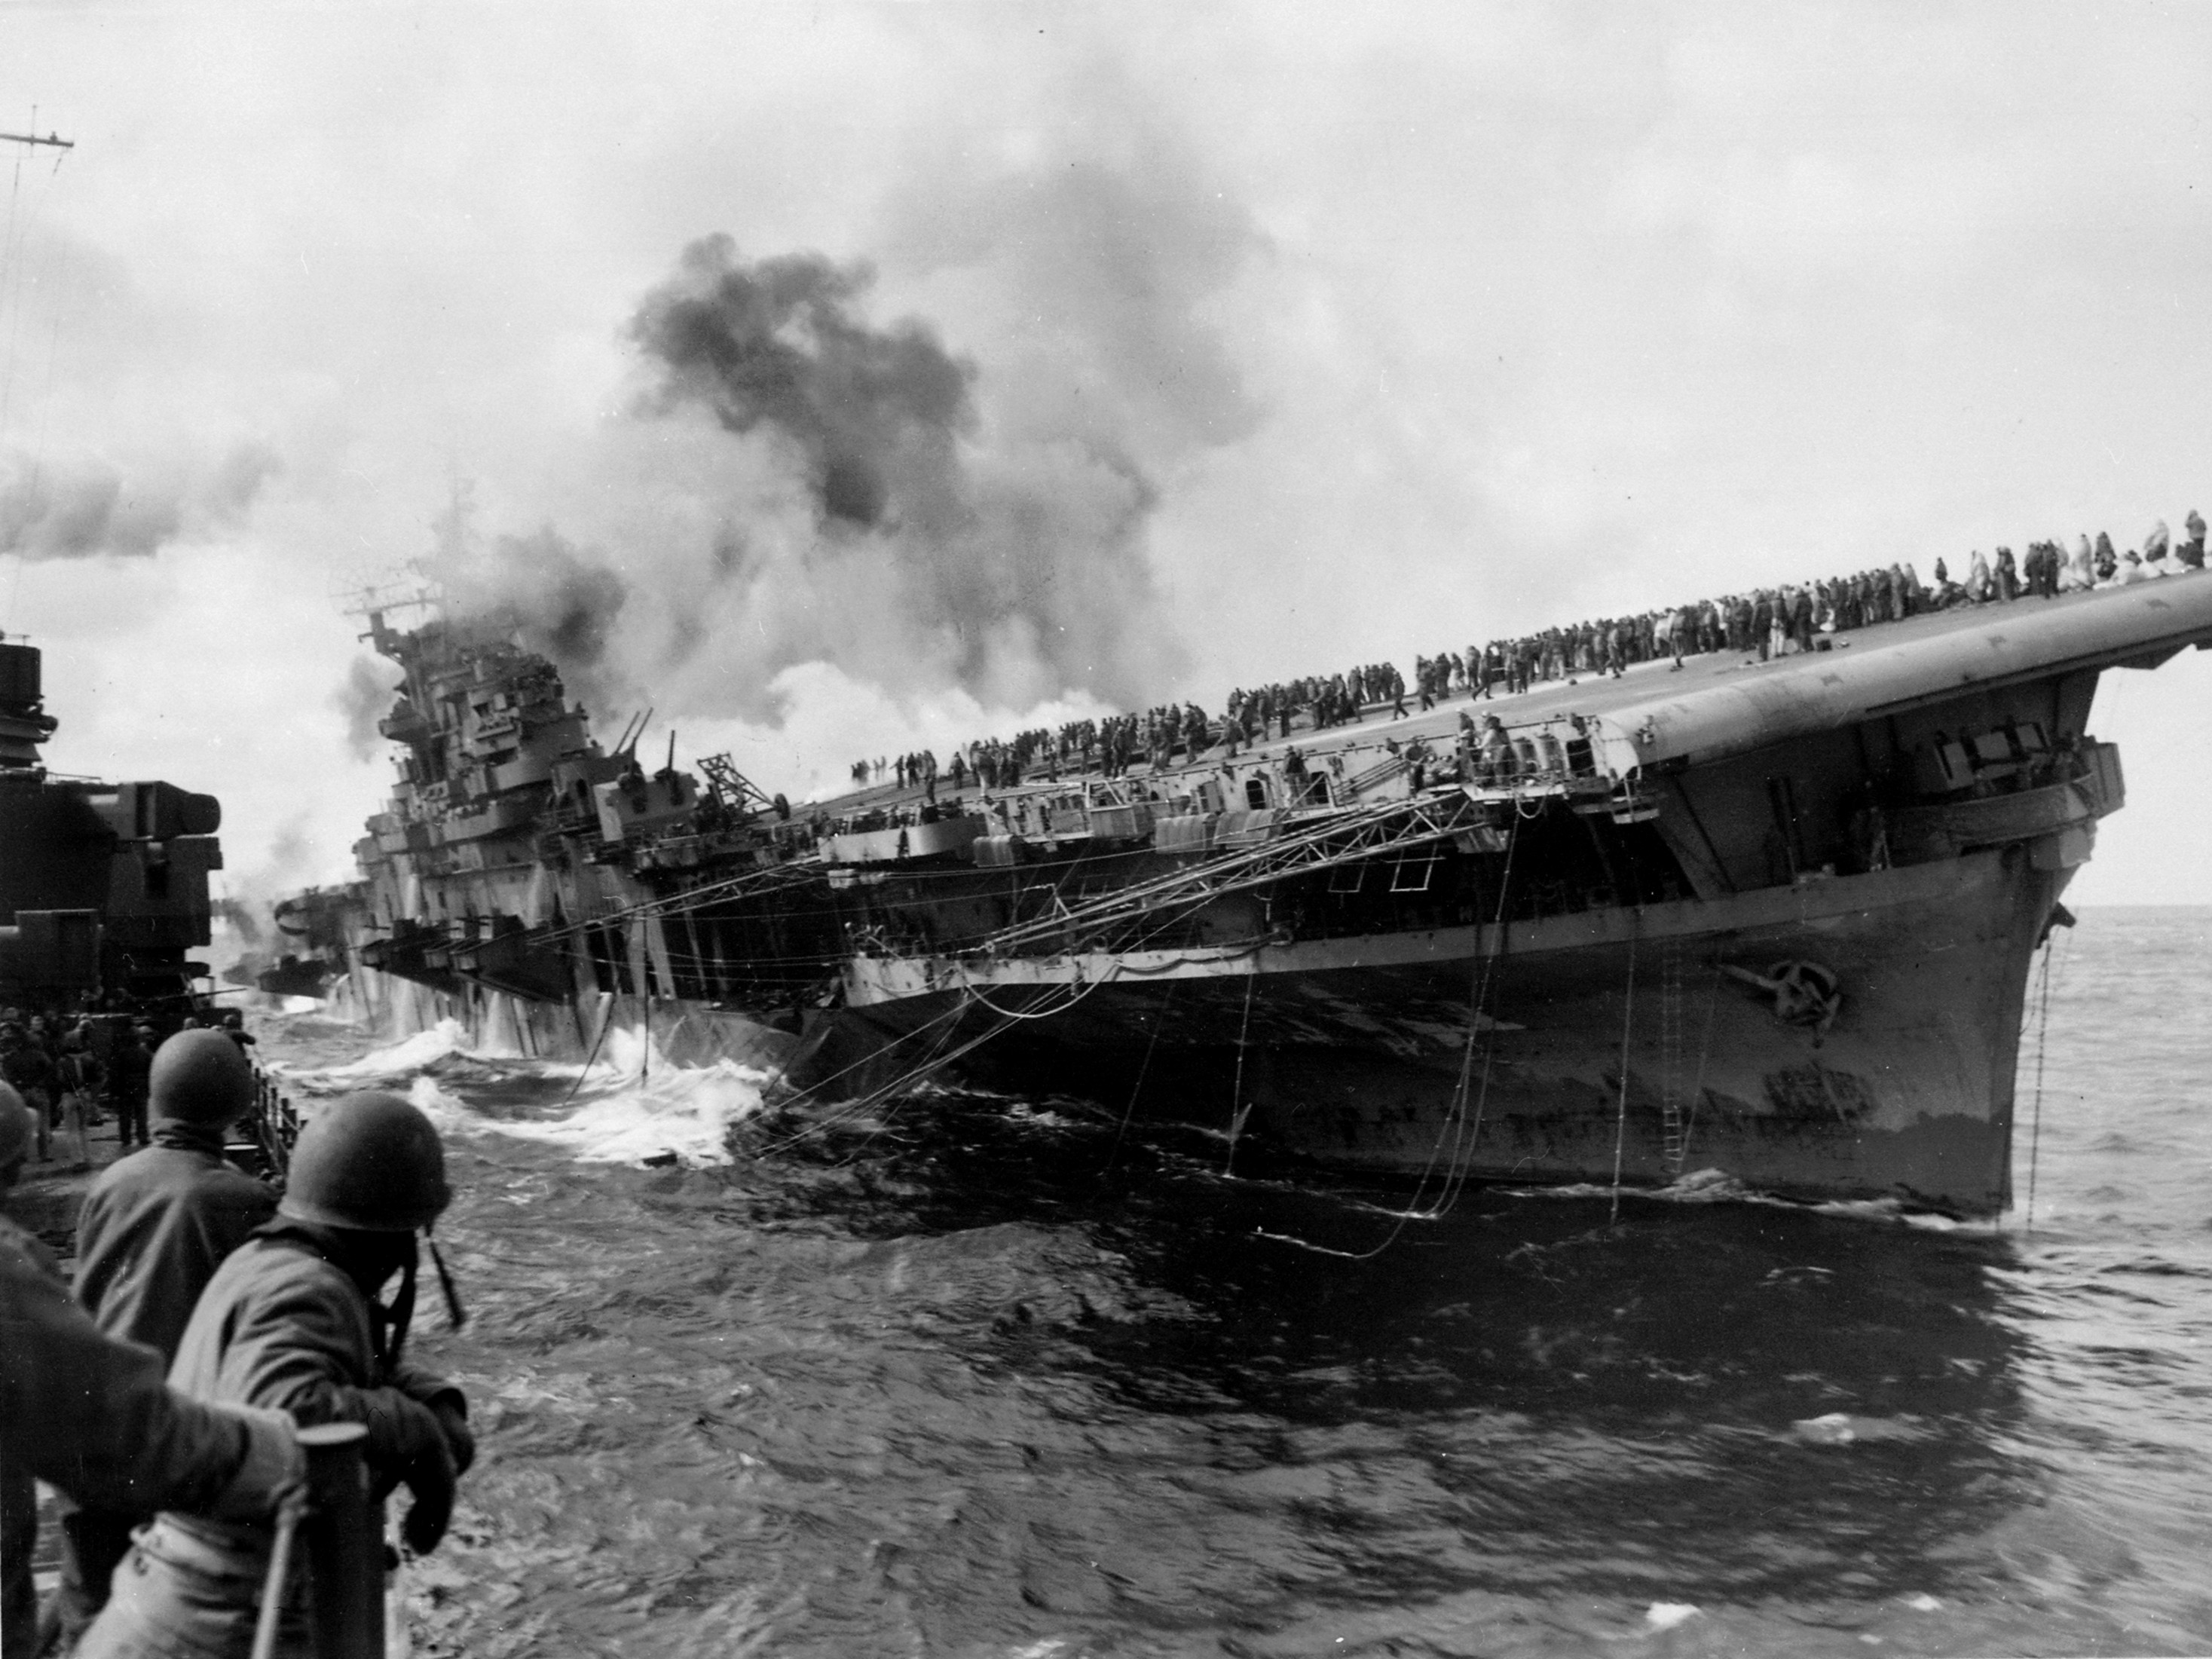 General 2935x2201 military World War II aircraft carrier monochrome USS Franklin military vehicle vehicle war wreck history